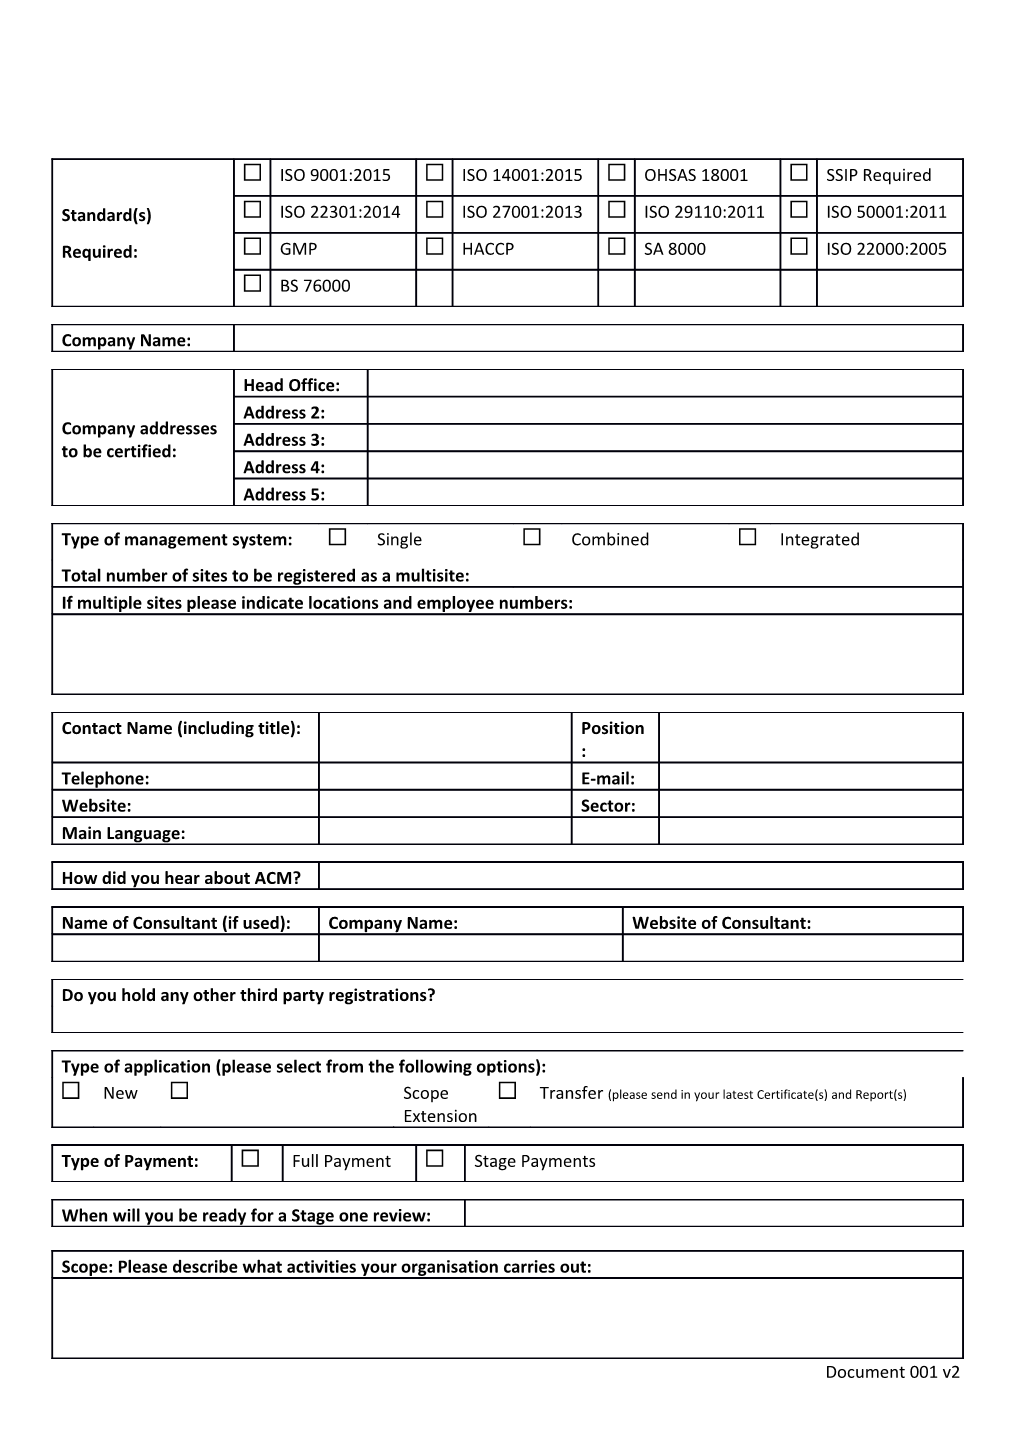 Please Send Back Filled Form To